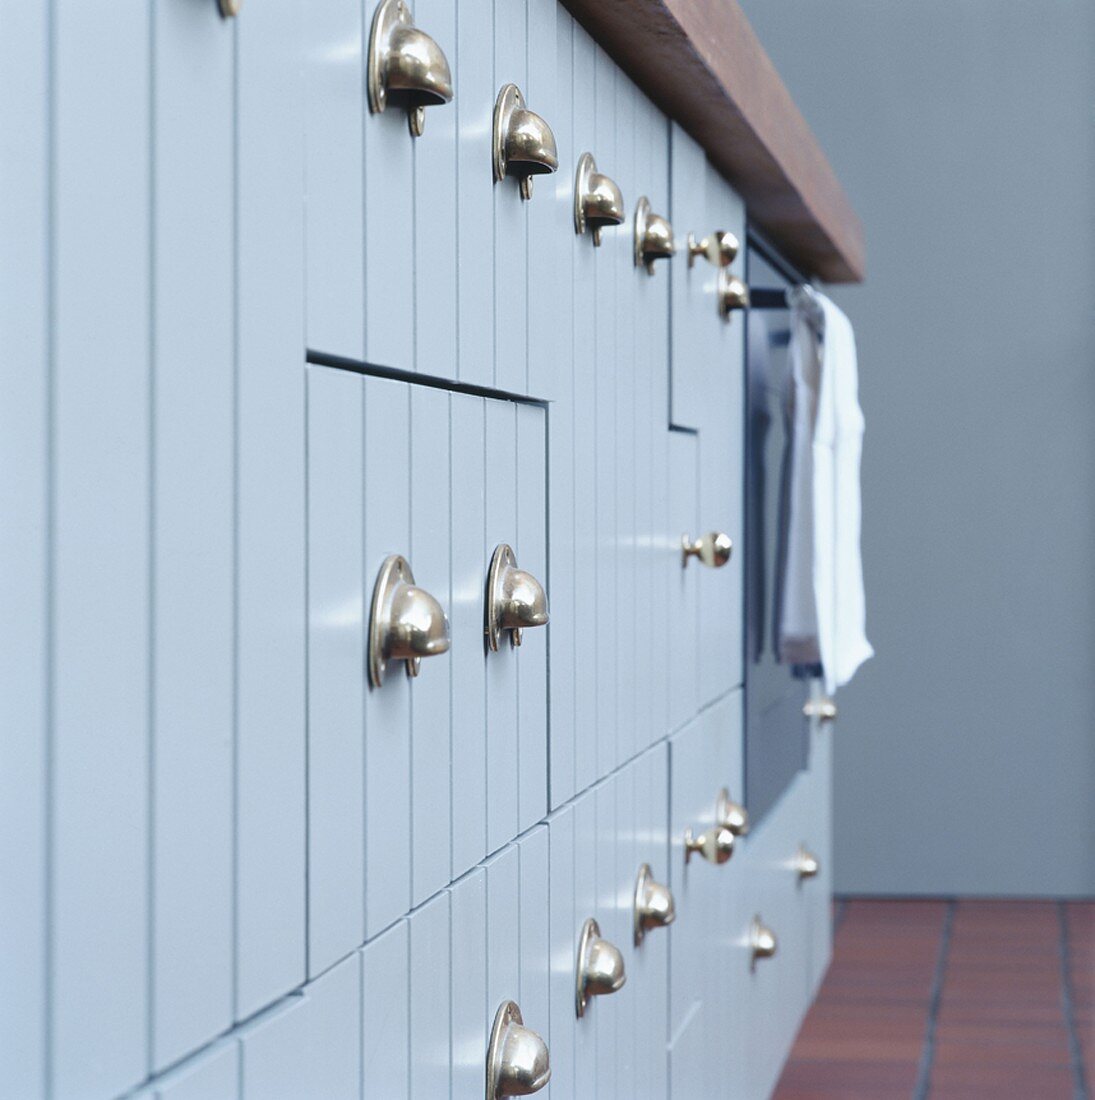 Drawers in a blue kitchen unit